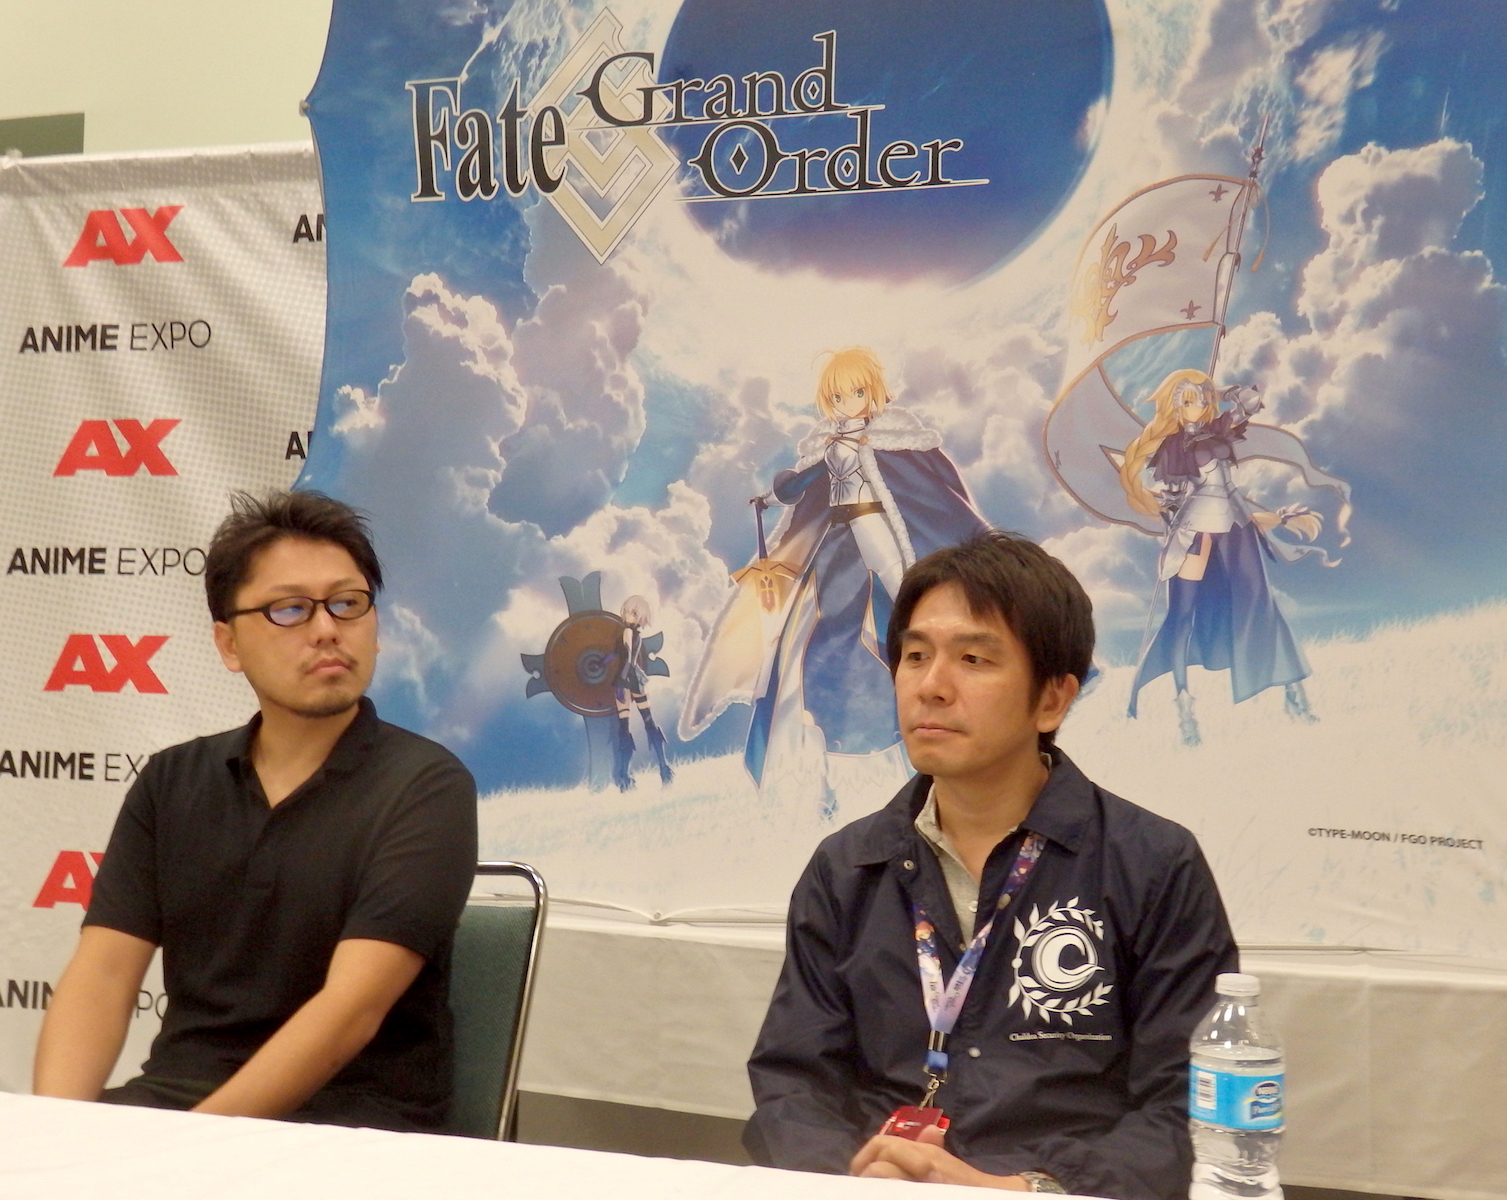 Two Japanese men sitting at a table in front of a banner for Fate: Grand Order.